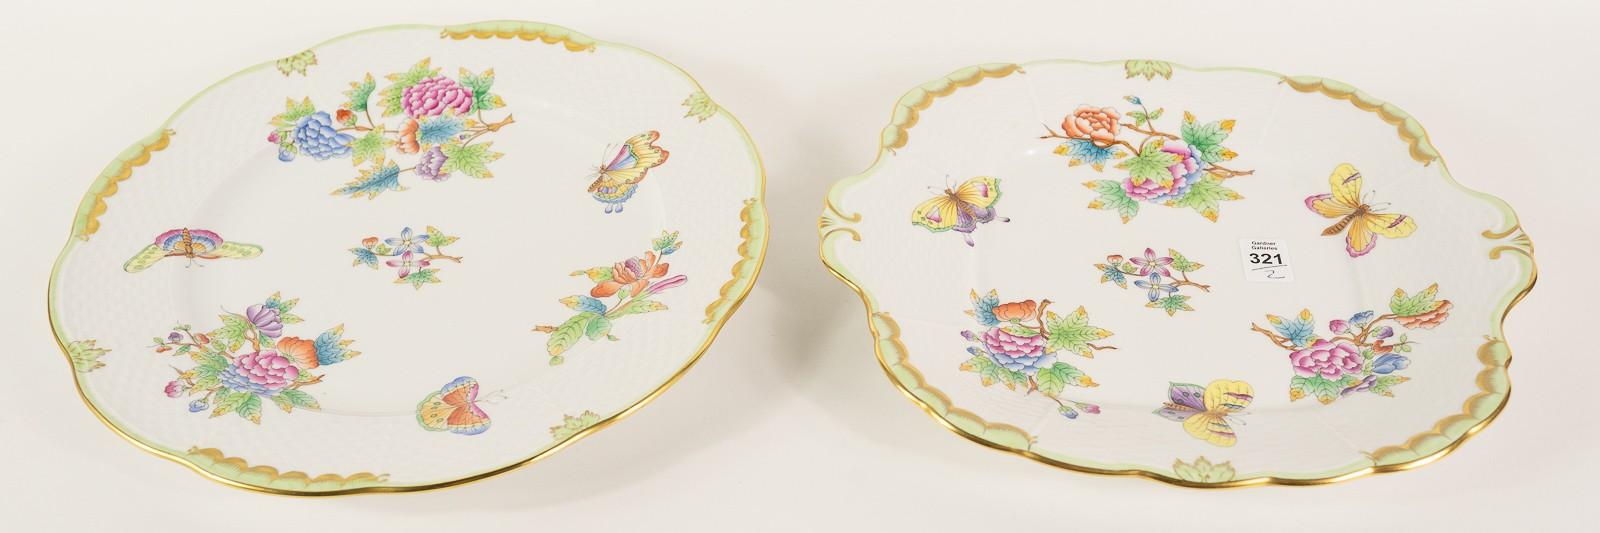 TWO HEREND SERVING TRAYS